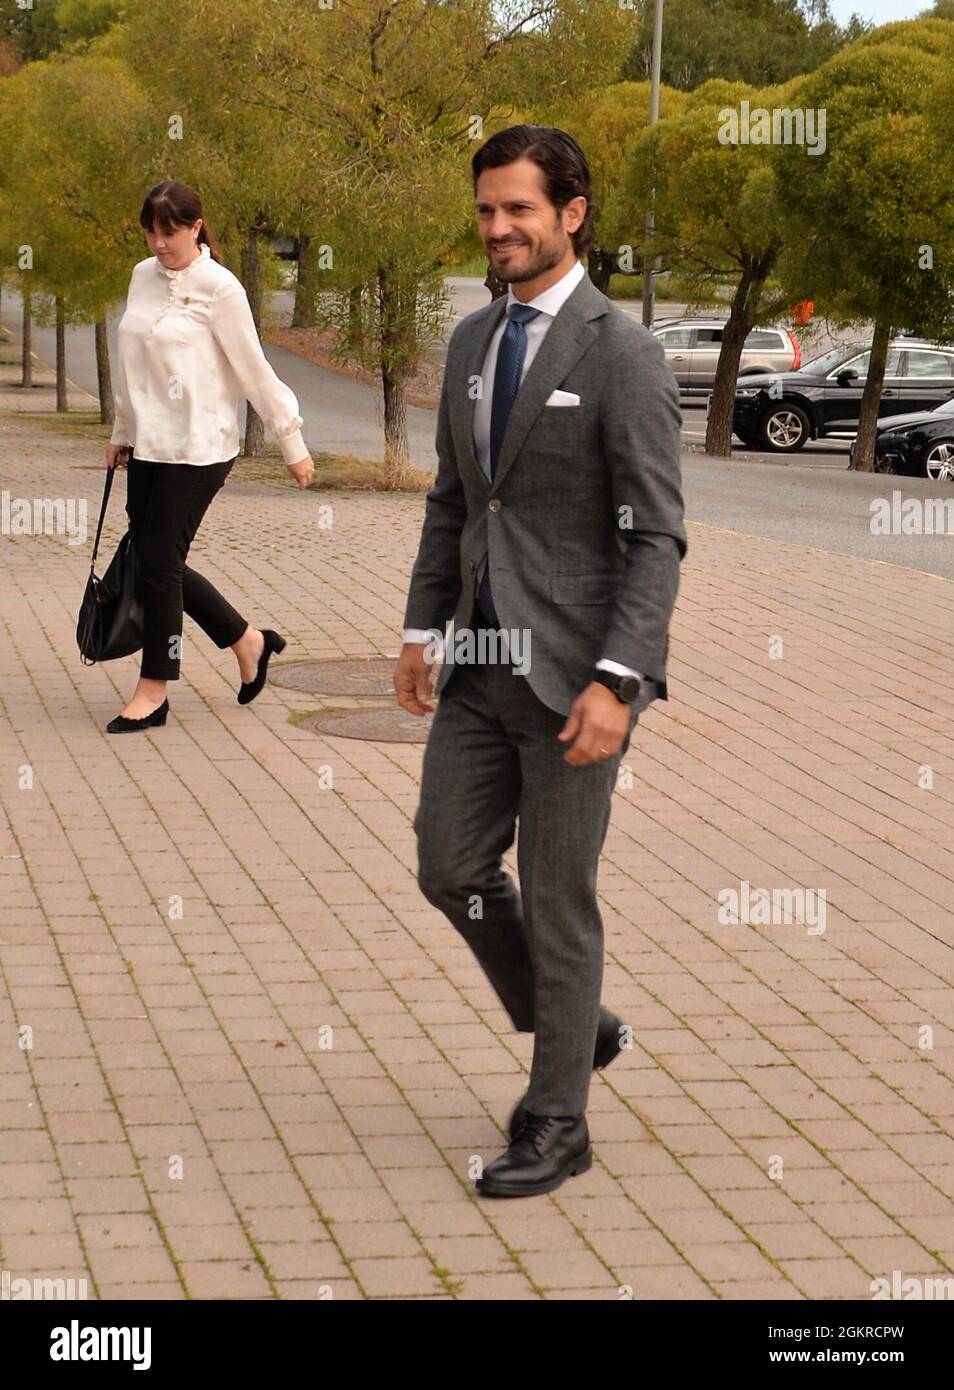 Stockholm, Sweden on September 15, 2021. Prince Carl Philip arrives at the meeting with the Swedish team ahead of the Bocuse d'Or WC 2021, Stockholm, Sweden on September 15, 2021. Photo by Peter Johansson/Stella Pictures/ABACAPRESS.COM Stock Photo